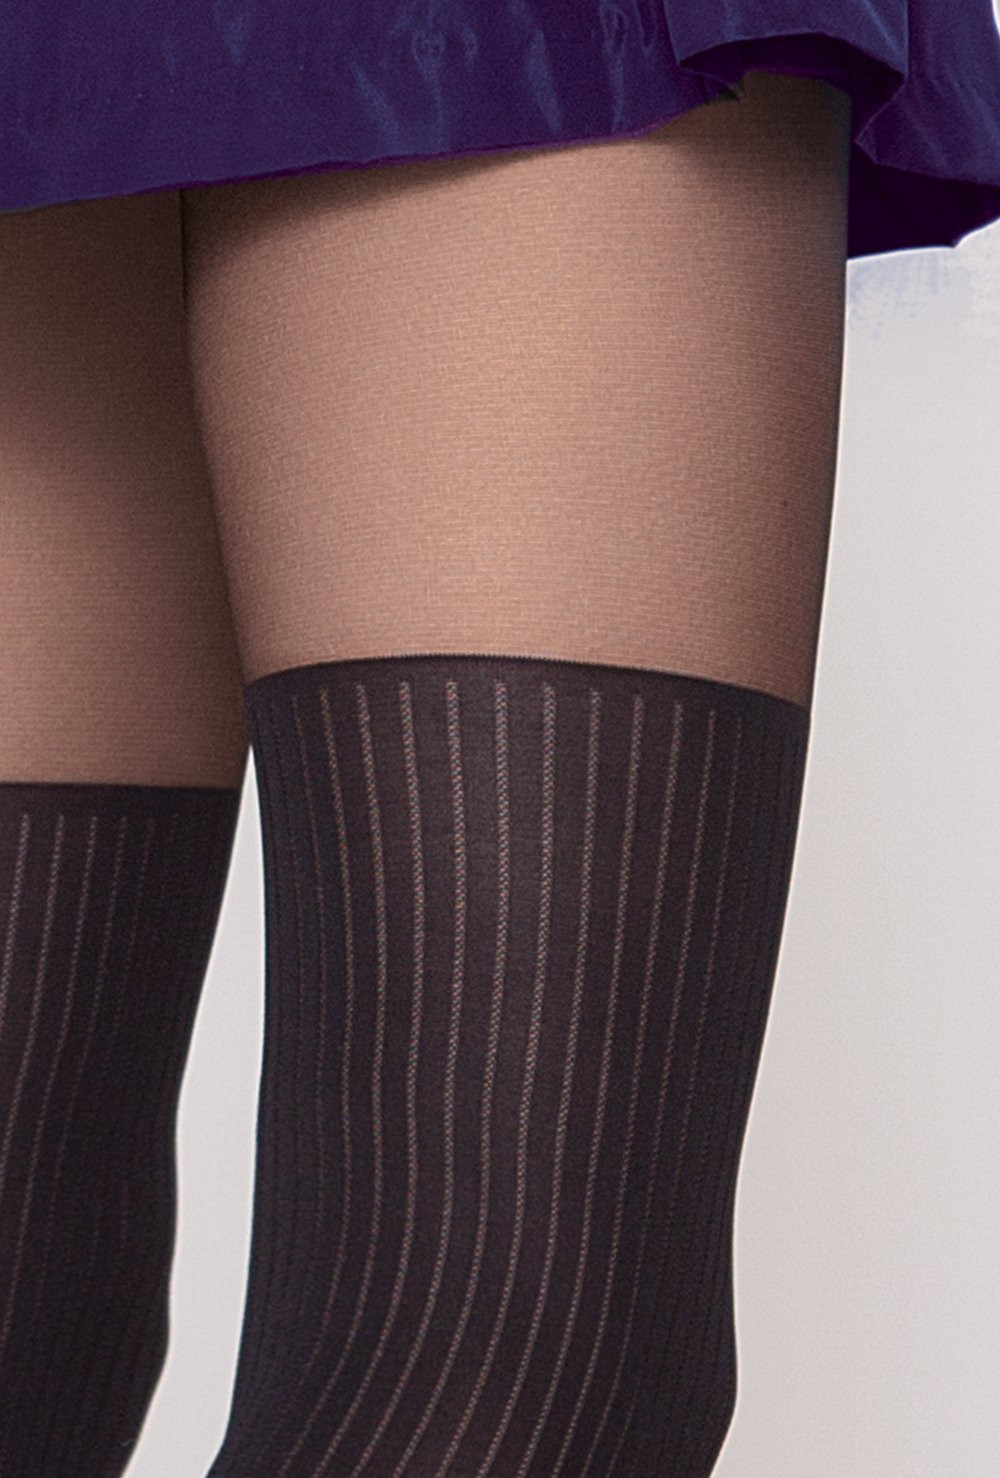 https://gattawear.com/7006/mock-over-the-knee-tights-with-ribbed-pattern-girl-up-32.jpg